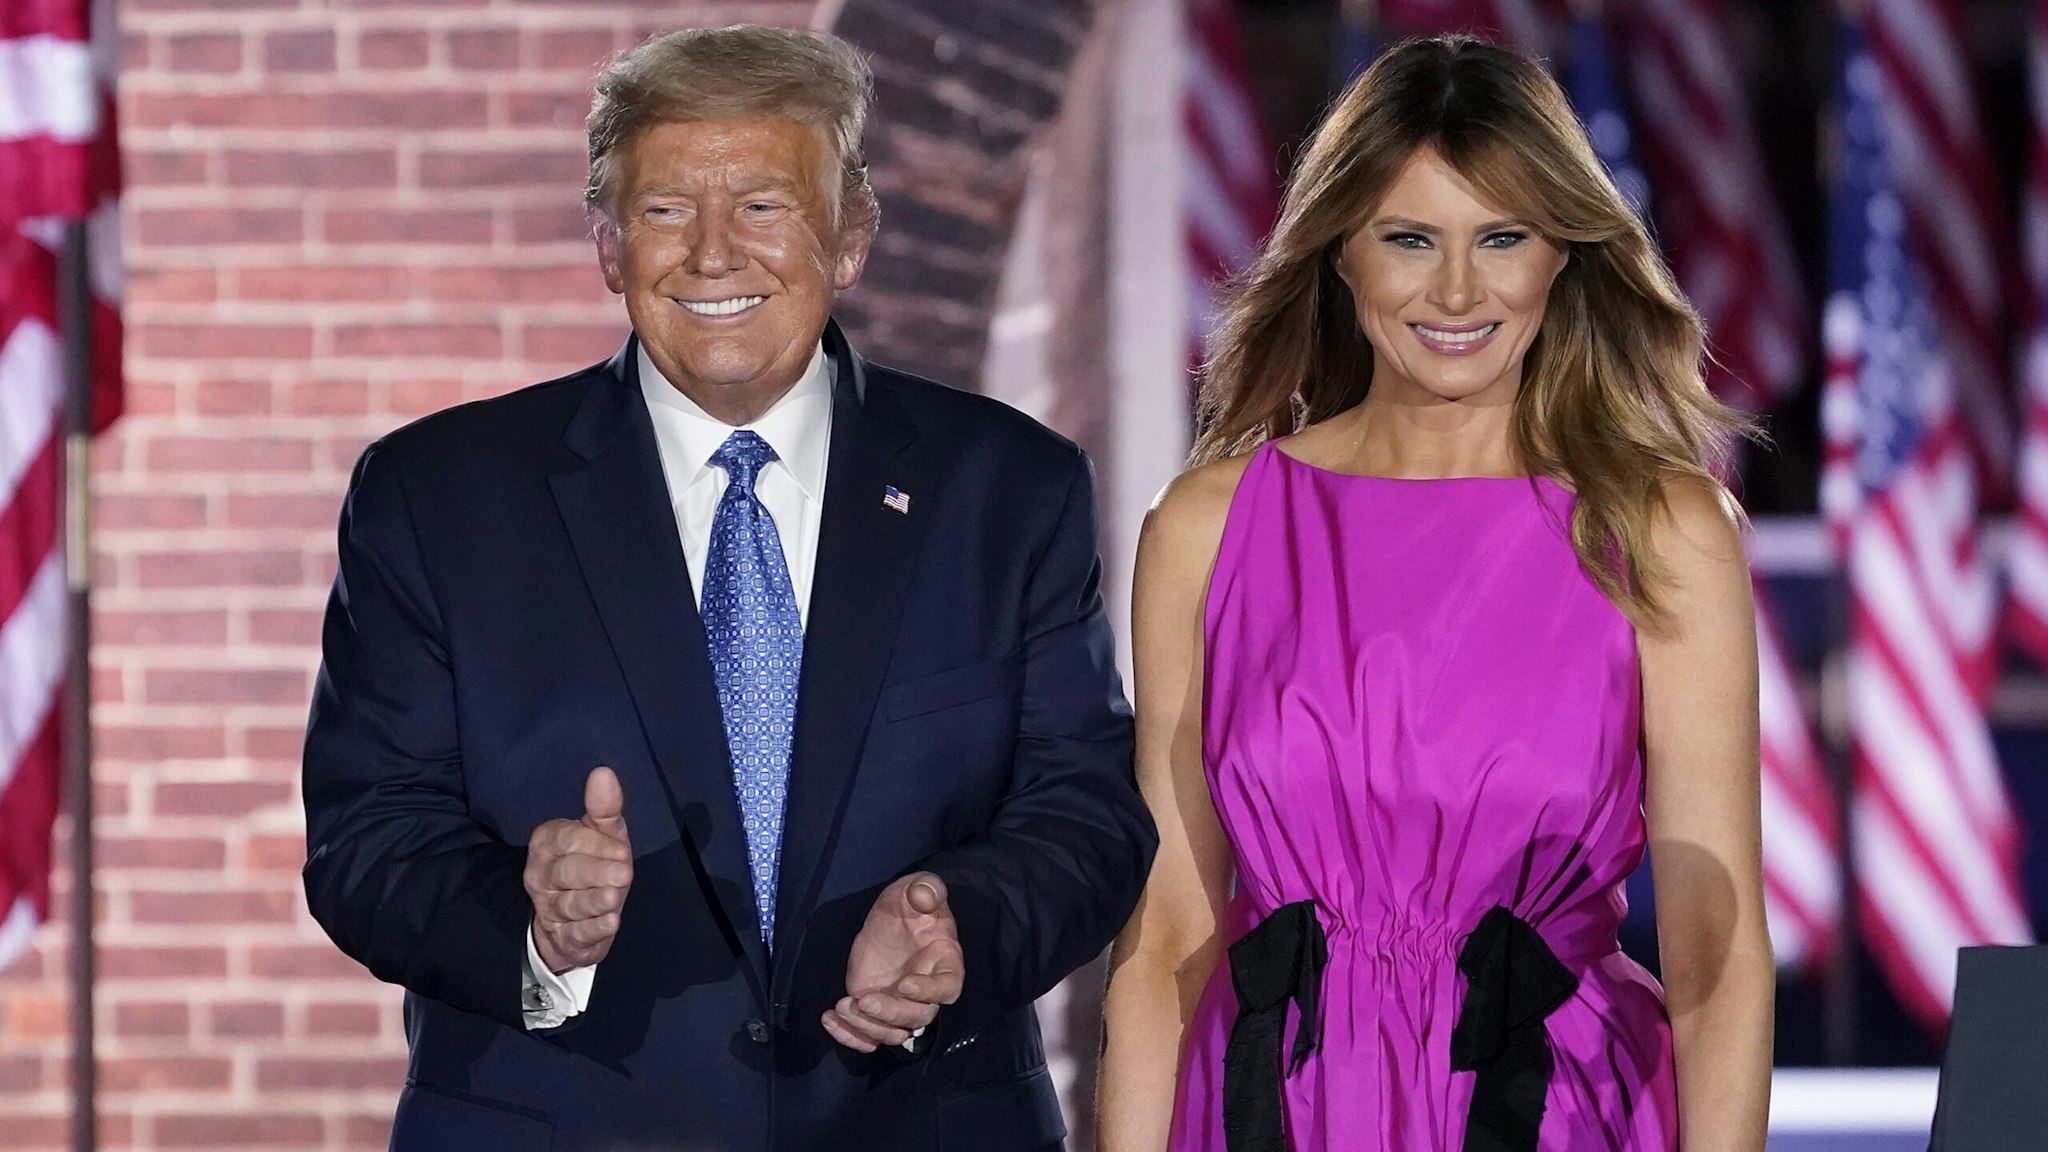 BALTIMORE, MARYLAND - AUGUST 26: President Donald Trump and first lady Melania Trump attend Mike Pence’s acceptance speech for the vice presidential nomination during the Republican National Convention at Fort McHenry National Monument on August 26, 2020 in Baltimore, Maryland. The convention is being held virtually due to the coronavirus pandemic but includes speeches from various locations including Charlotte, North Carolina, Washington, DC, and Baltimore, Maryland.